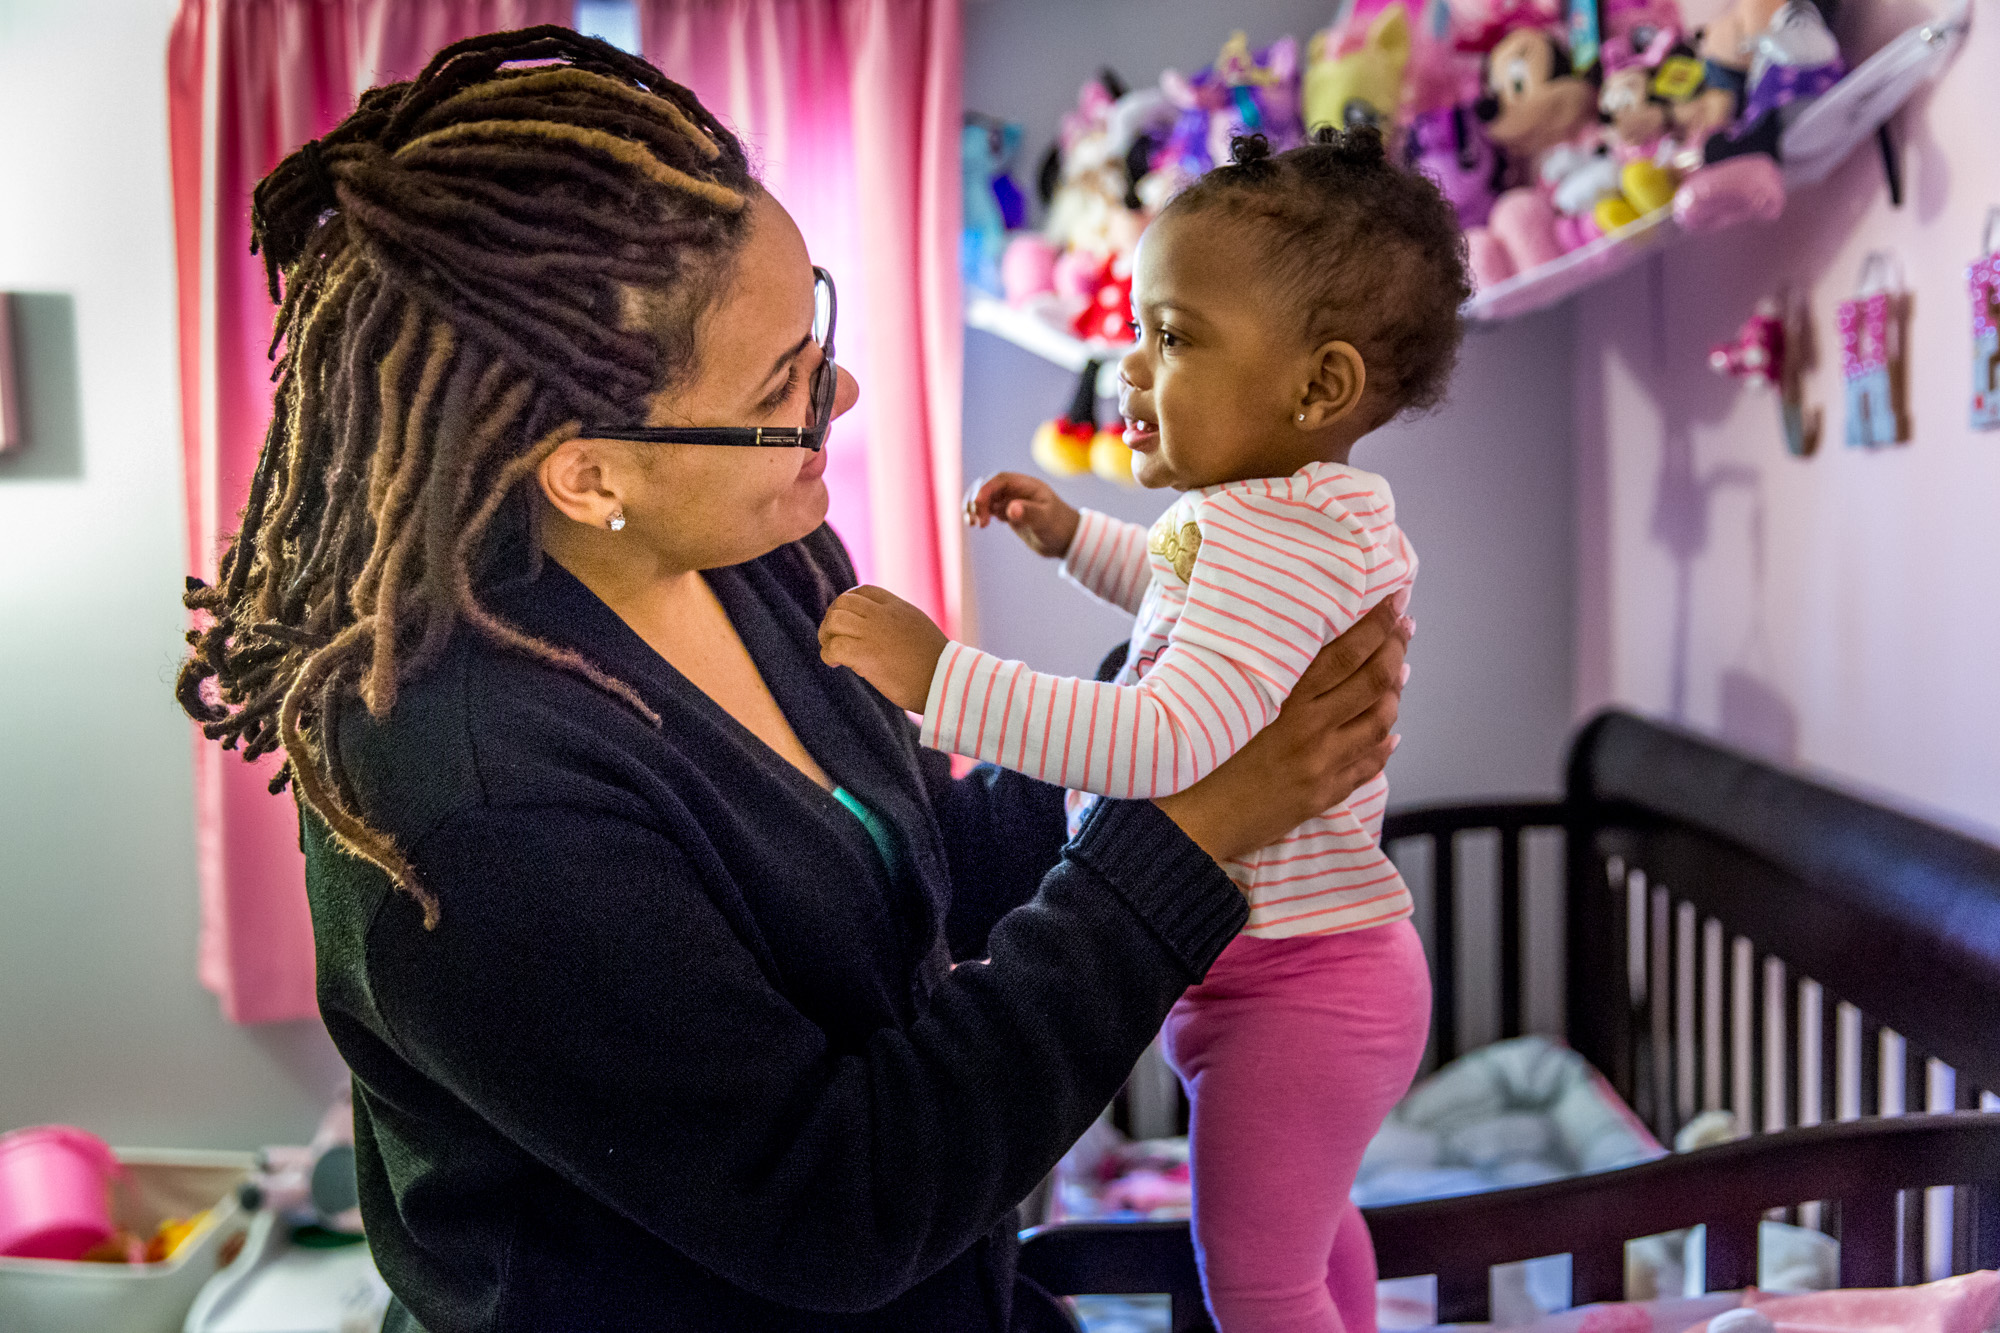 Chanelle Blair missed several months of work after her daughter Chayenne was born, leaving the family financially stretched. She received assistance for diapers
from the St. Louis Diaper Bank and Parents as Teachers.